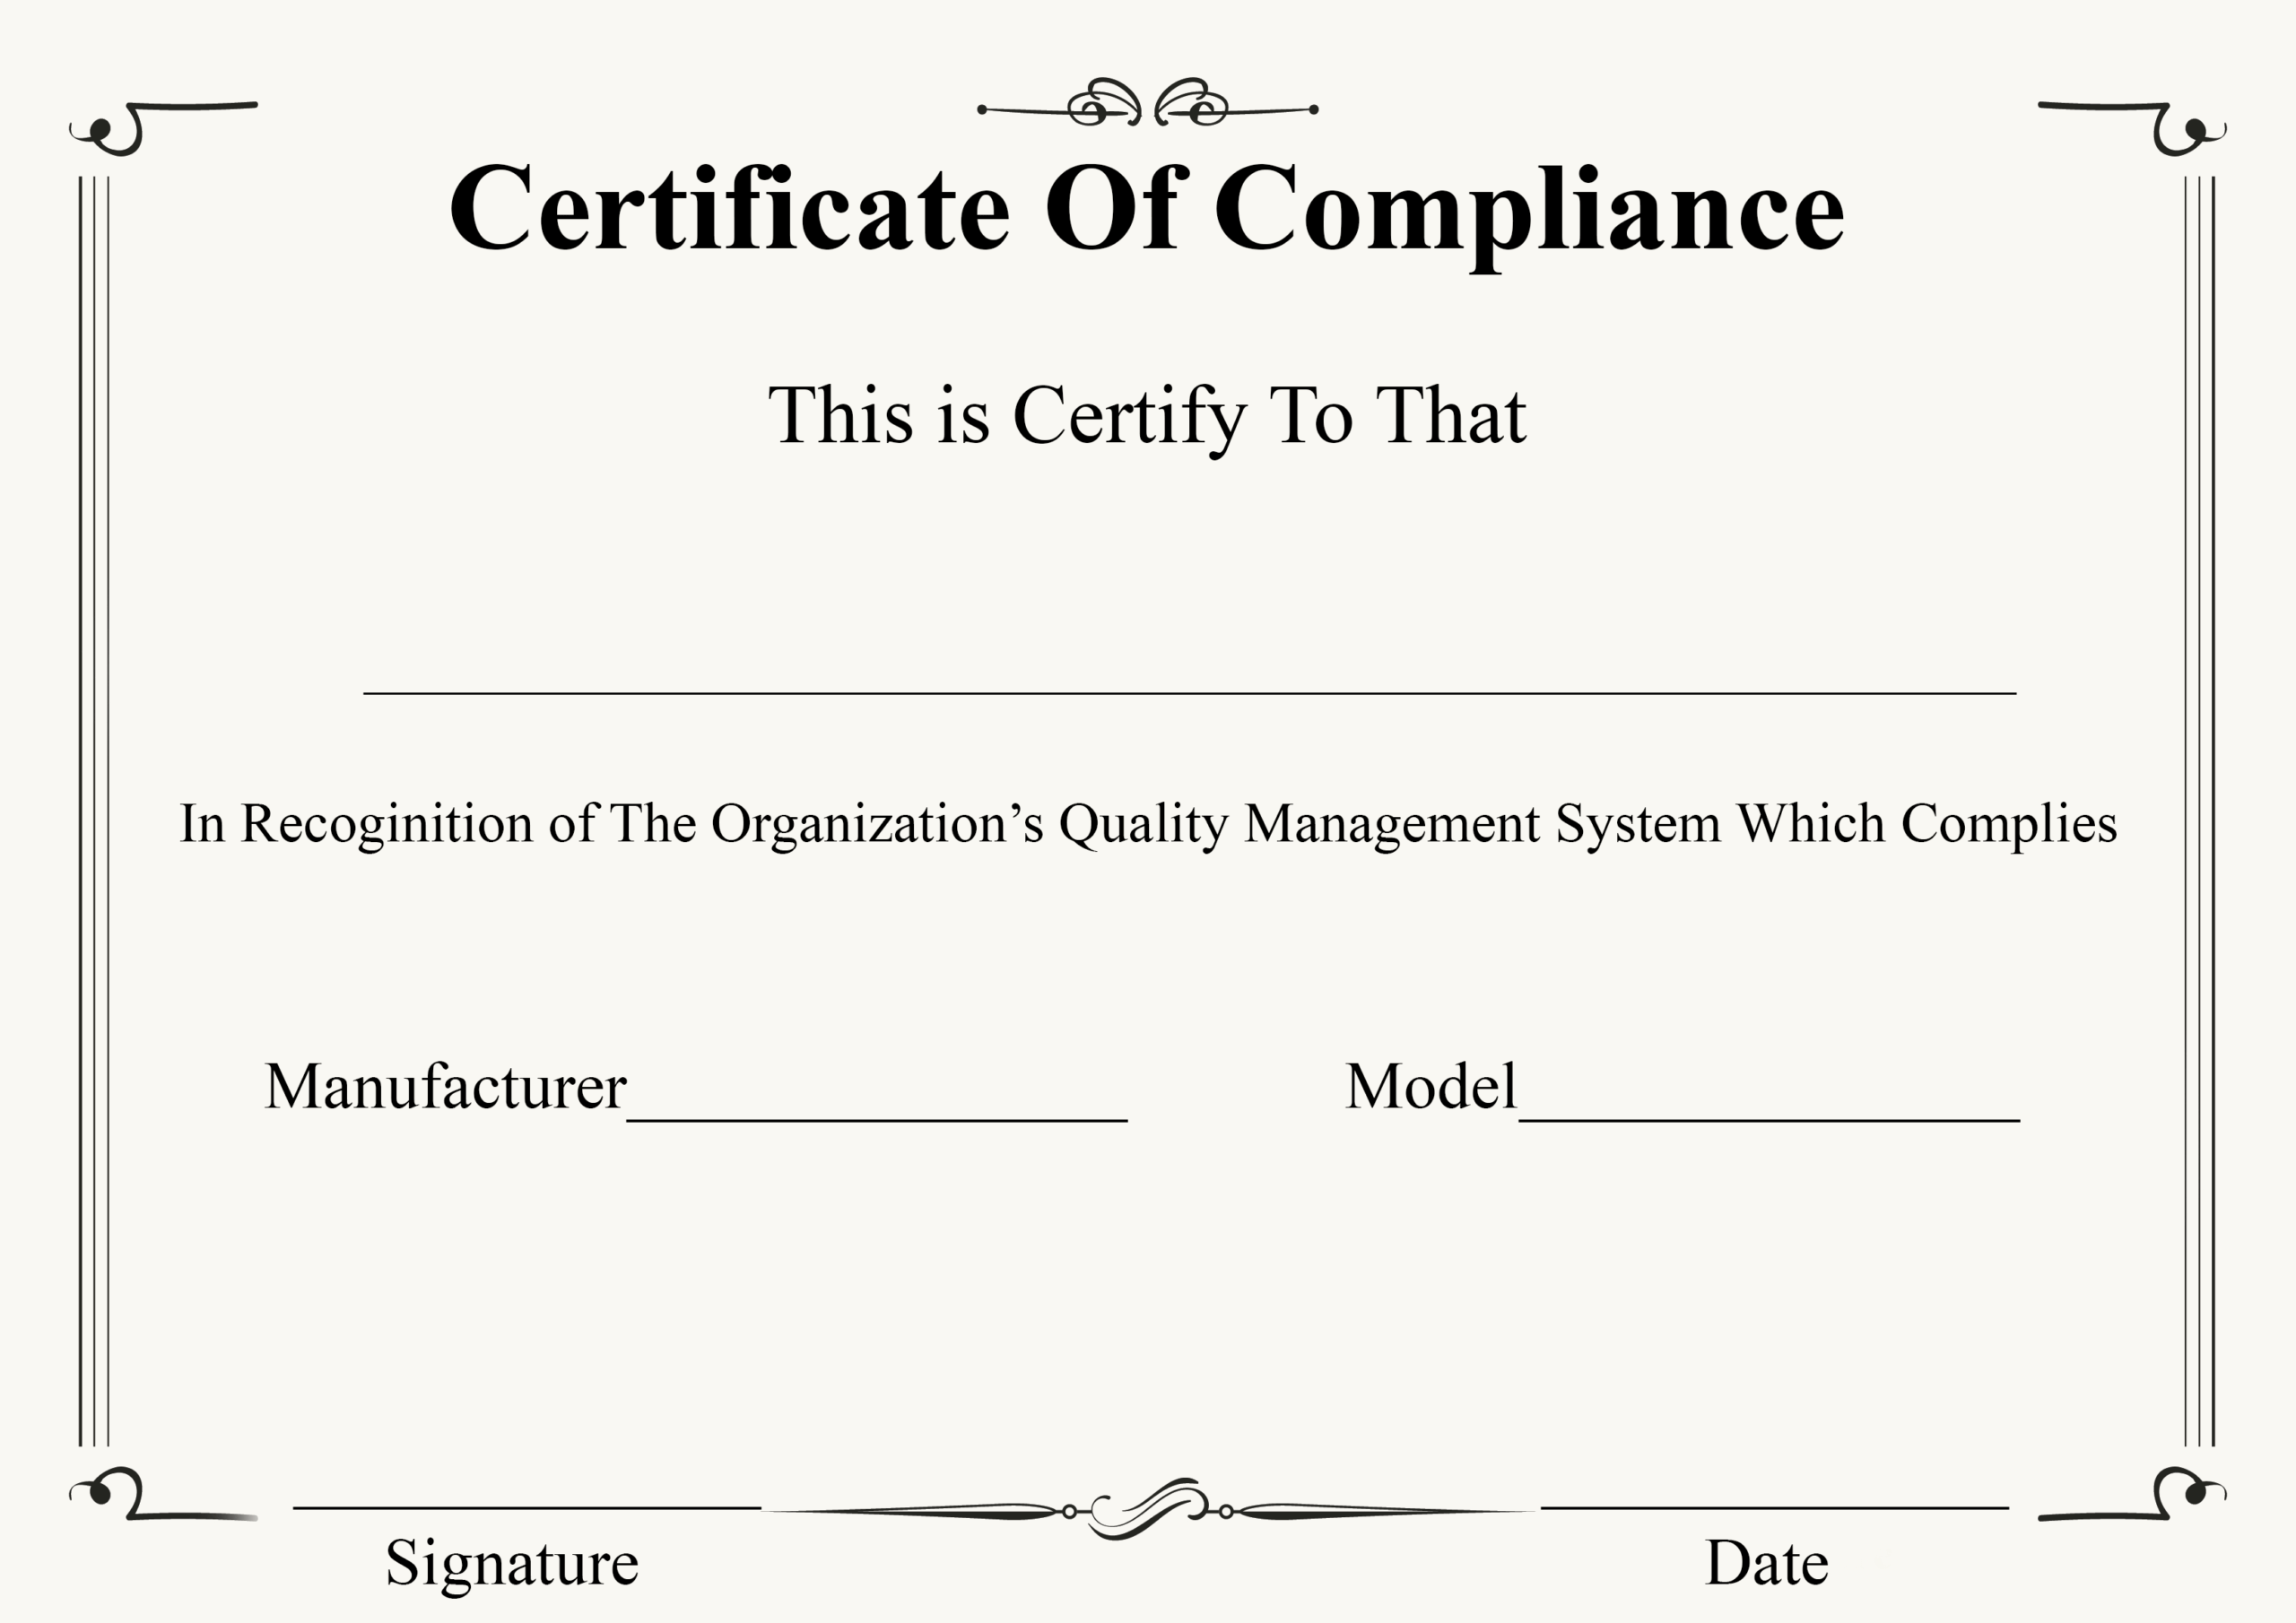 ❤️ Free Certificate Of Compliance Templates❤️ With Certificate Of Compliance Template